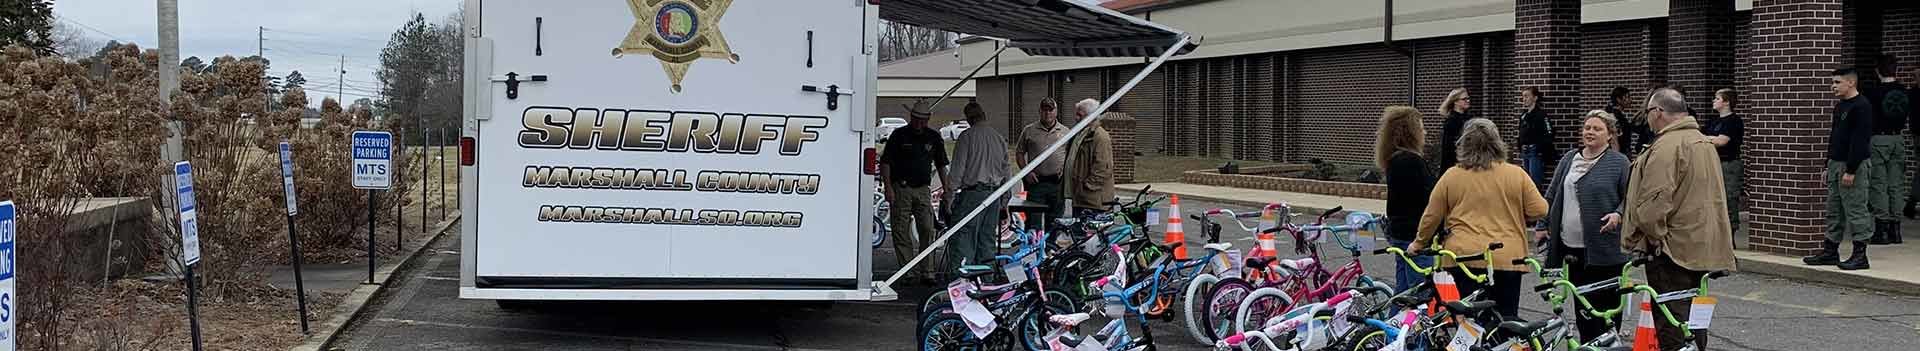 Sheriff Office Giving out Bikes to Kids